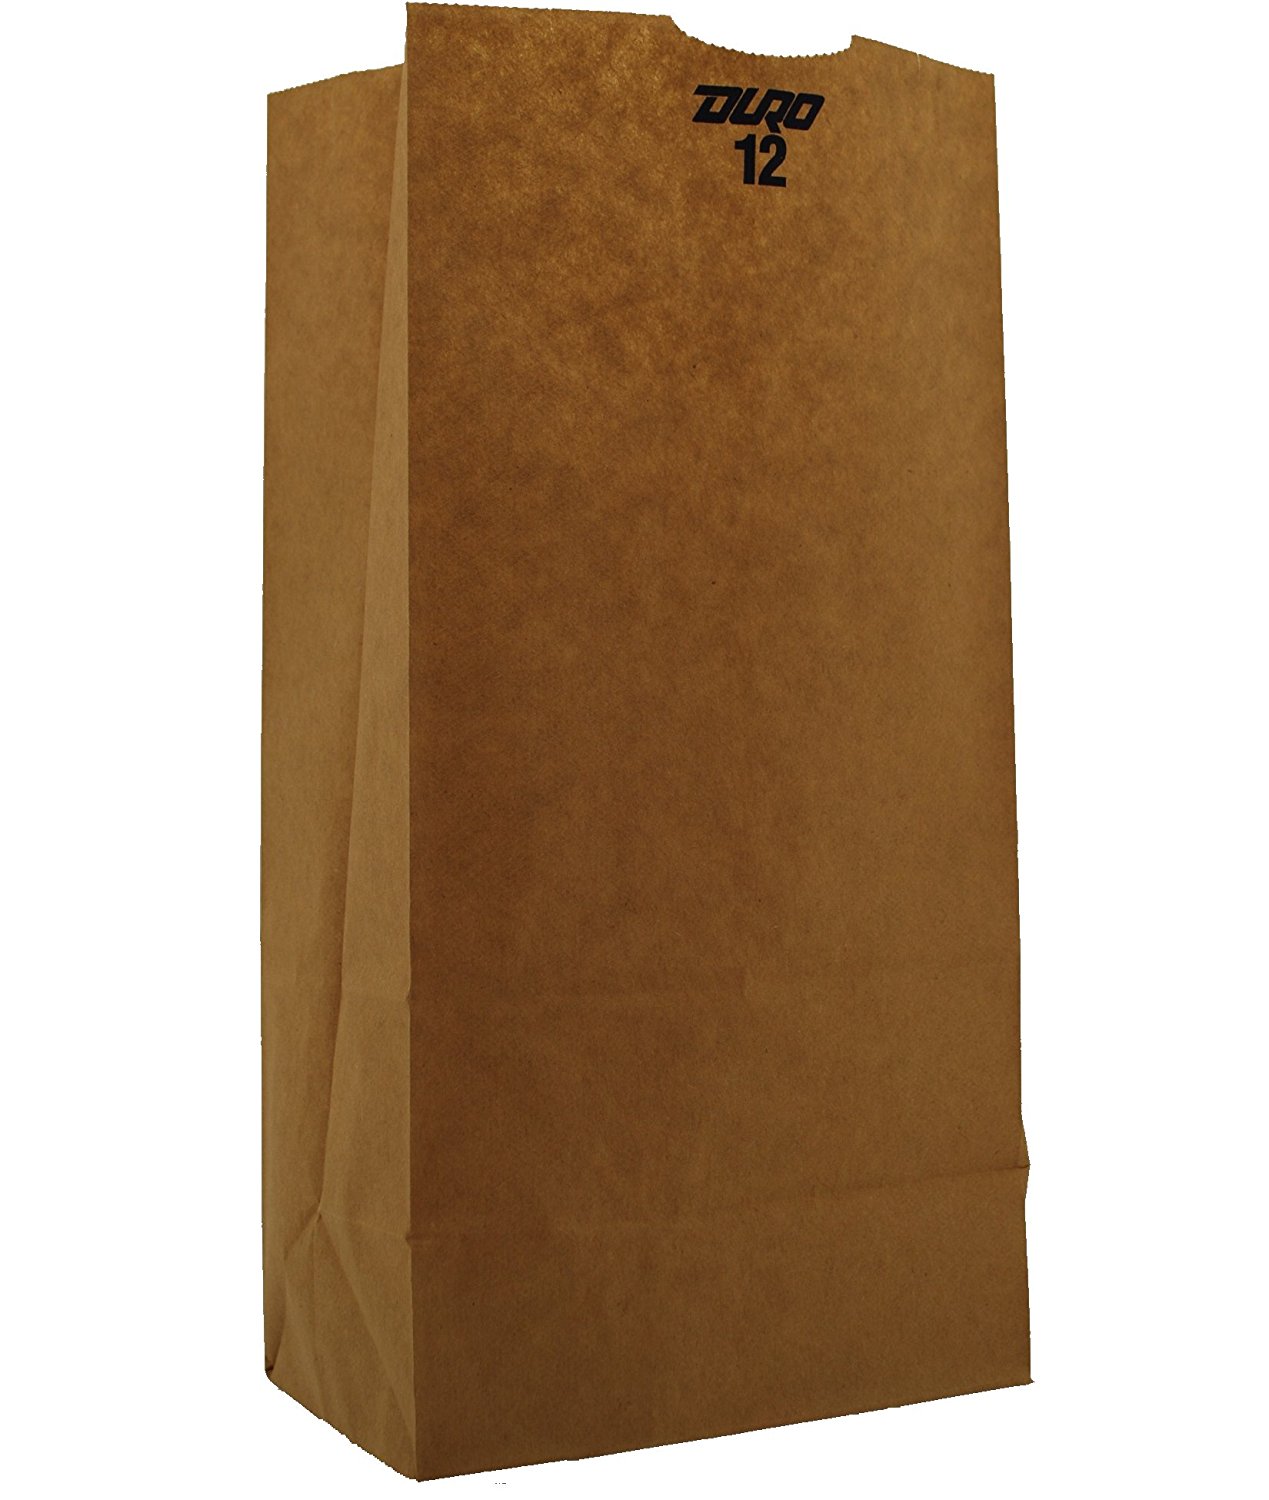 12# EXTRA HEAVY BROWN BAG 400 (71012)